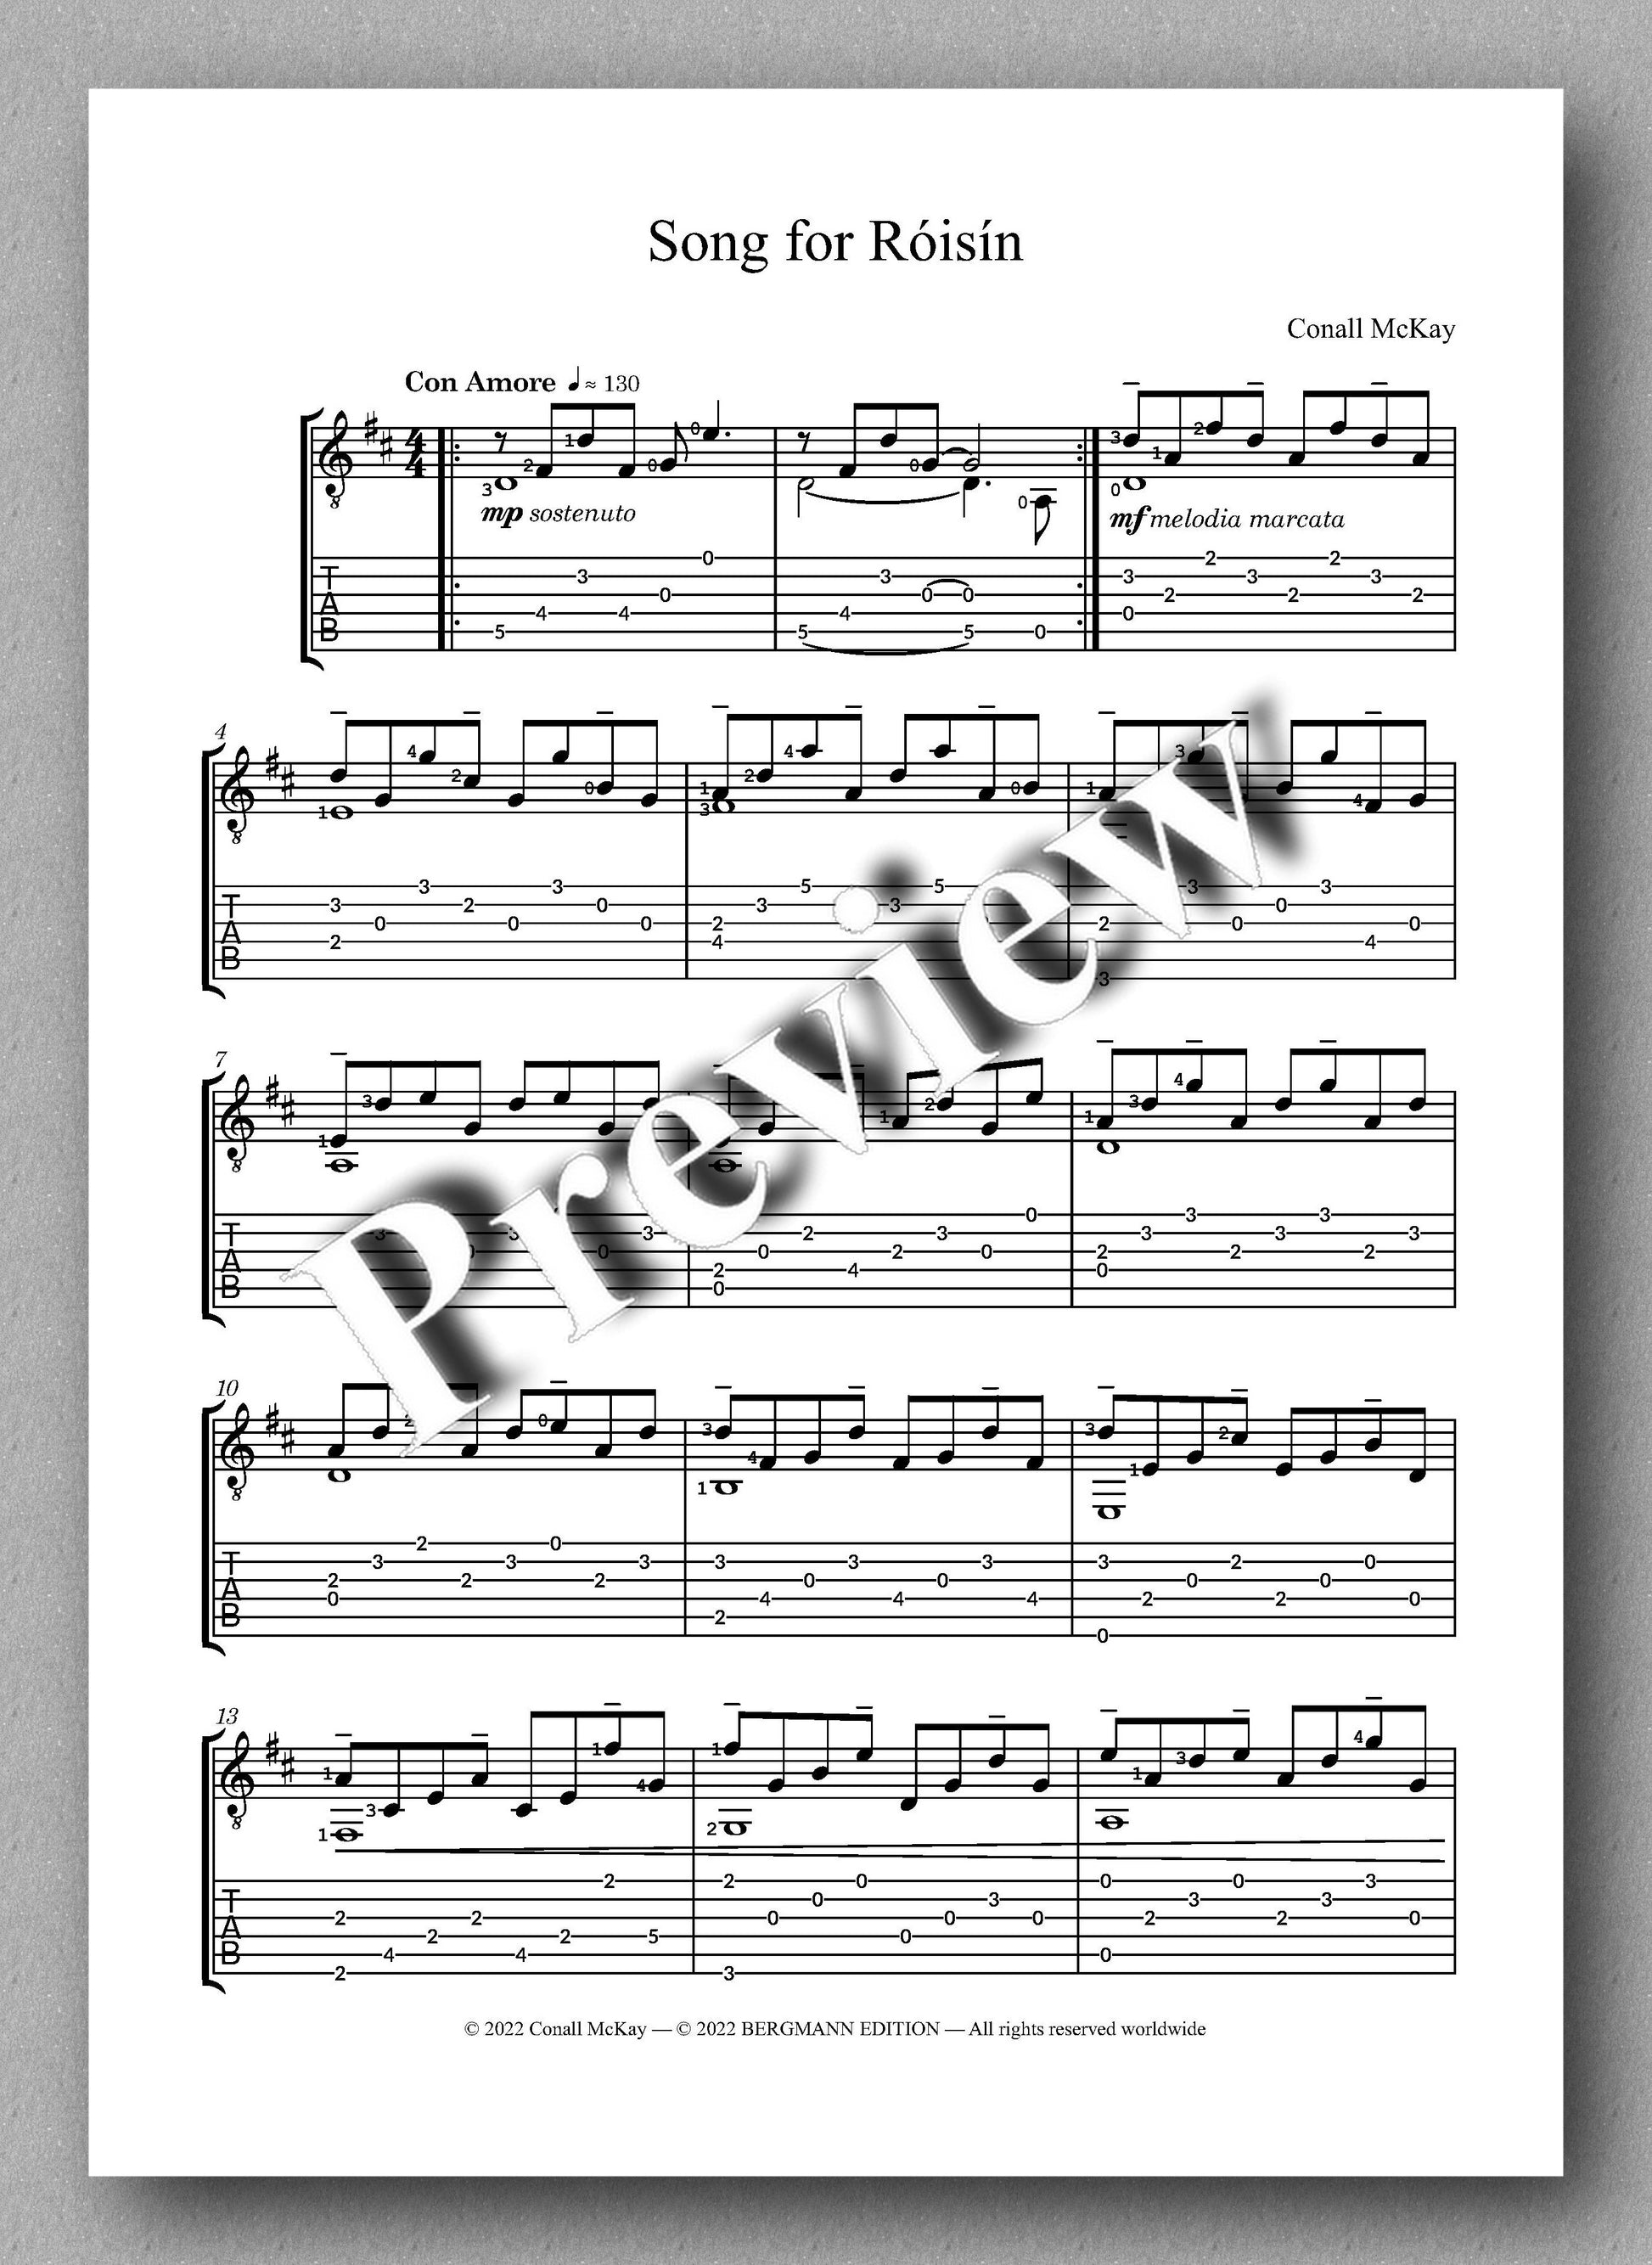 McKay, Three Songs Without Words - preview of the music score 1